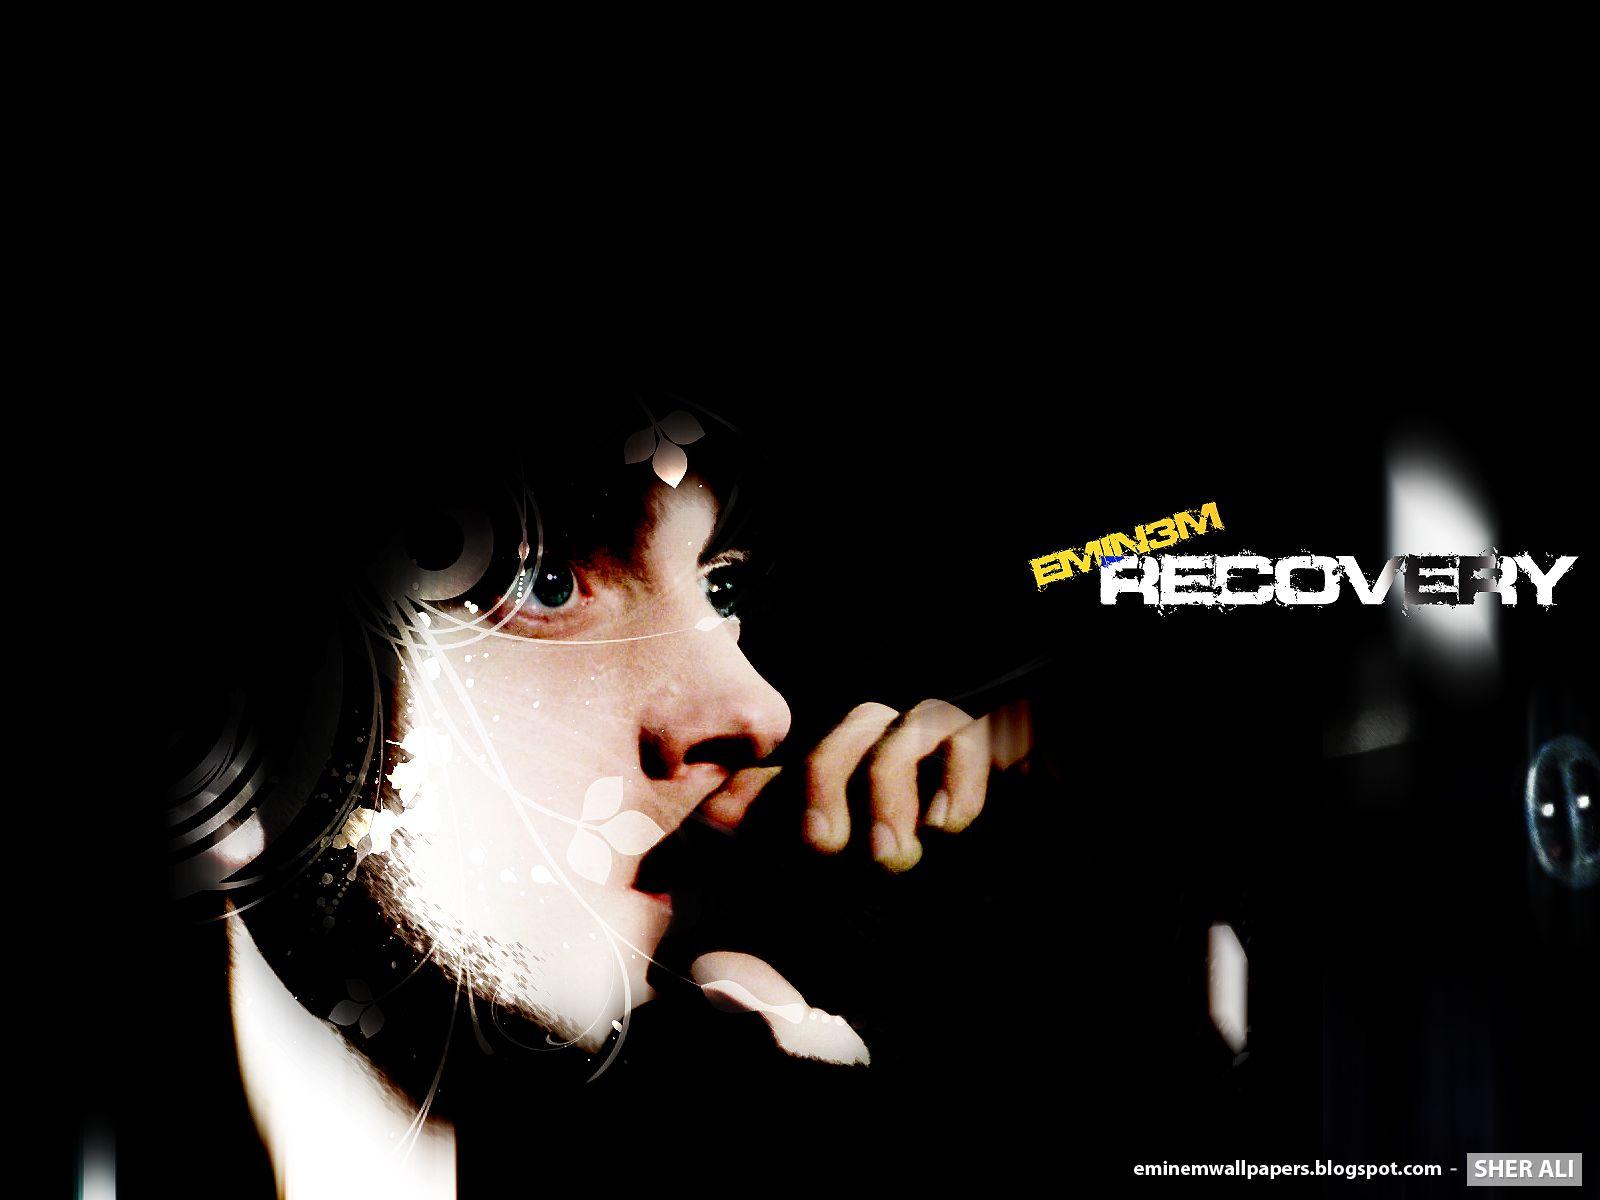 EMINEM WALLPAPERS: NEW EXCLUSIVE EMINEM RECOVERY WALLPAPER